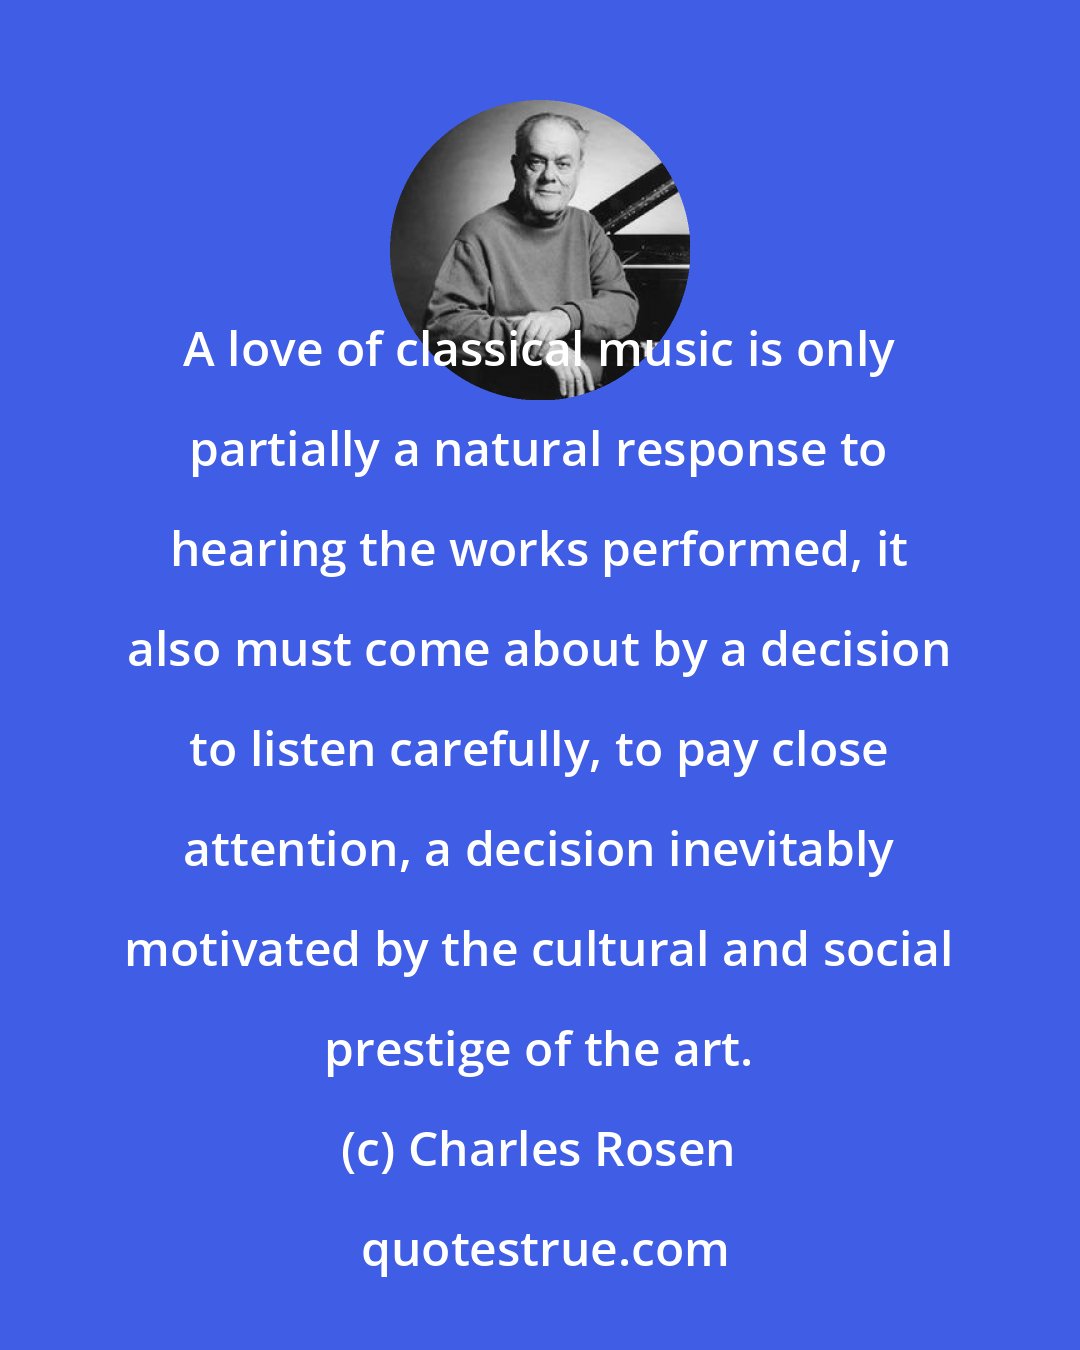 Charles Rosen: A love of classical music is only partially a natural response to hearing the works performed, it also must come about by a decision to listen carefully, to pay close attention, a decision inevitably motivated by the cultural and social prestige of the art.